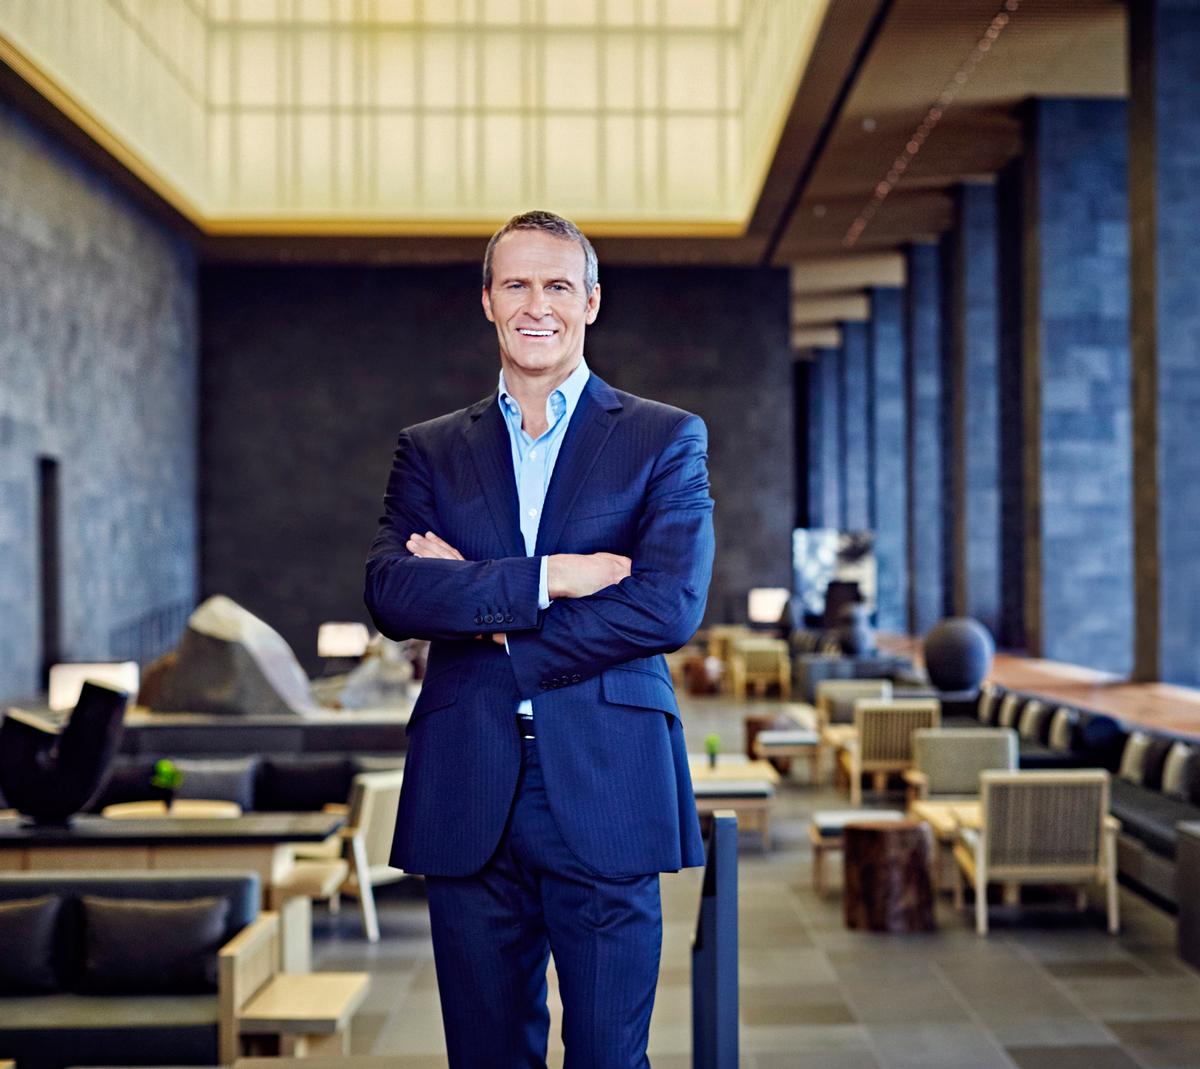 Vladislav Doronin, the owner of boutique hotel brand Aman, has told Spa Business that the group is looking to spend up to US$30m (€26m, £21m) in new spa developments and refurbs